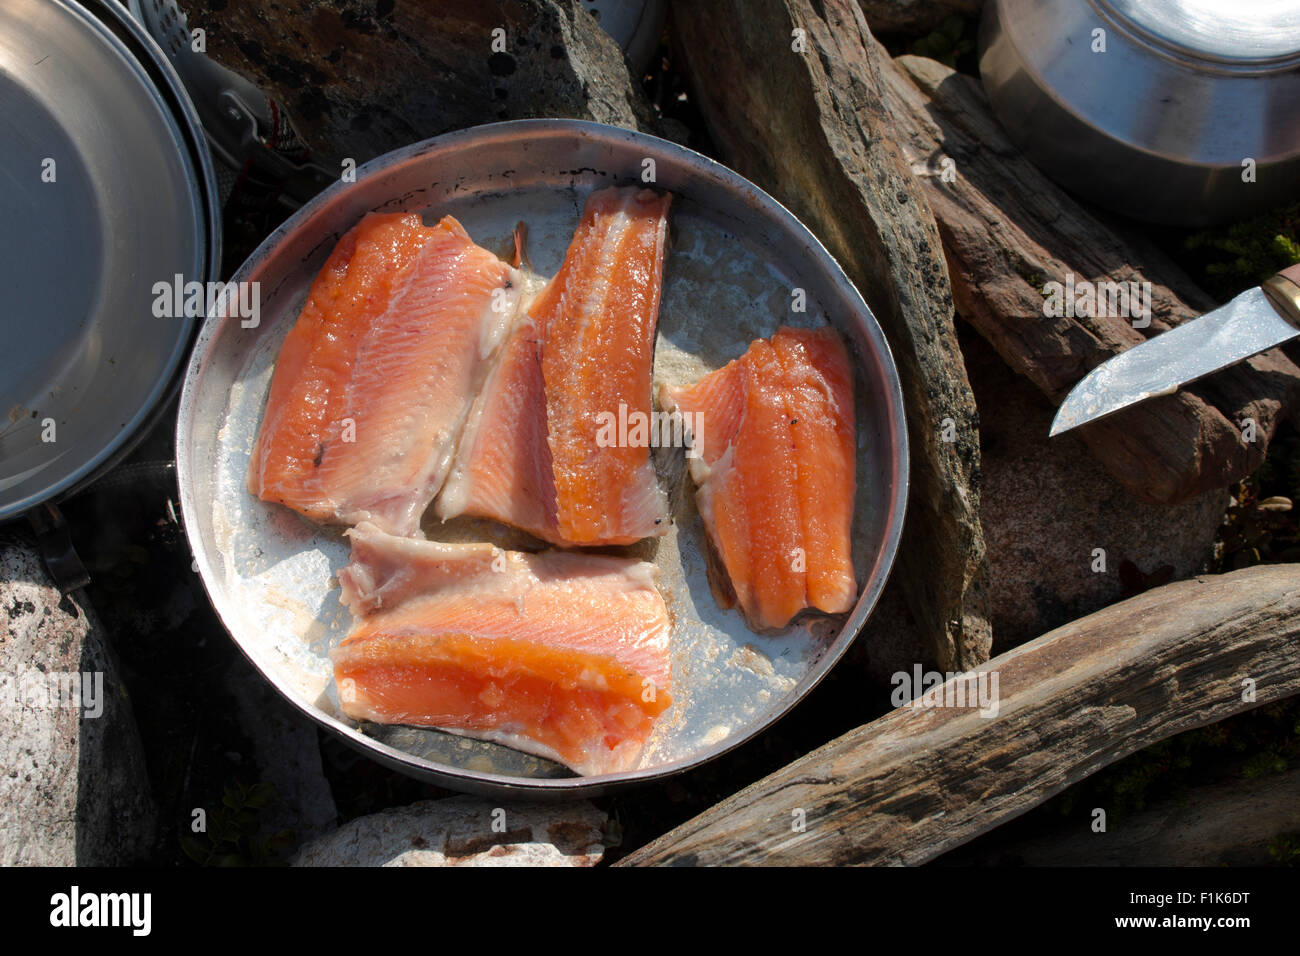 Fresh fish being cooked outdoors. Stock Photo